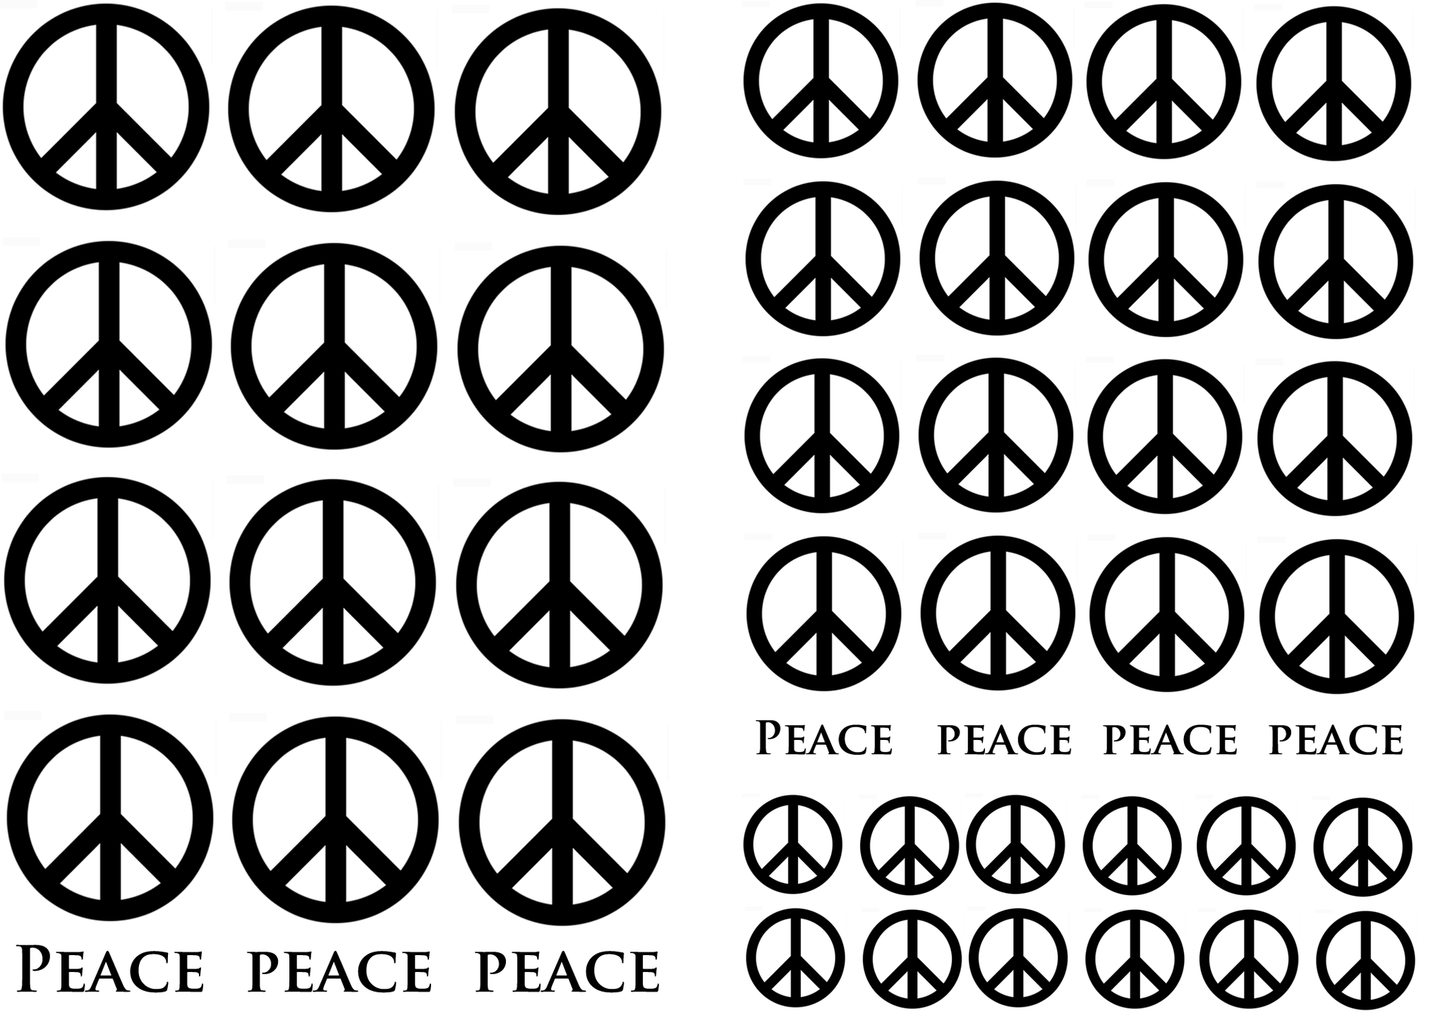 Peace Signs 47 pcs 1/2" to 1" Black Fused Glass Decals